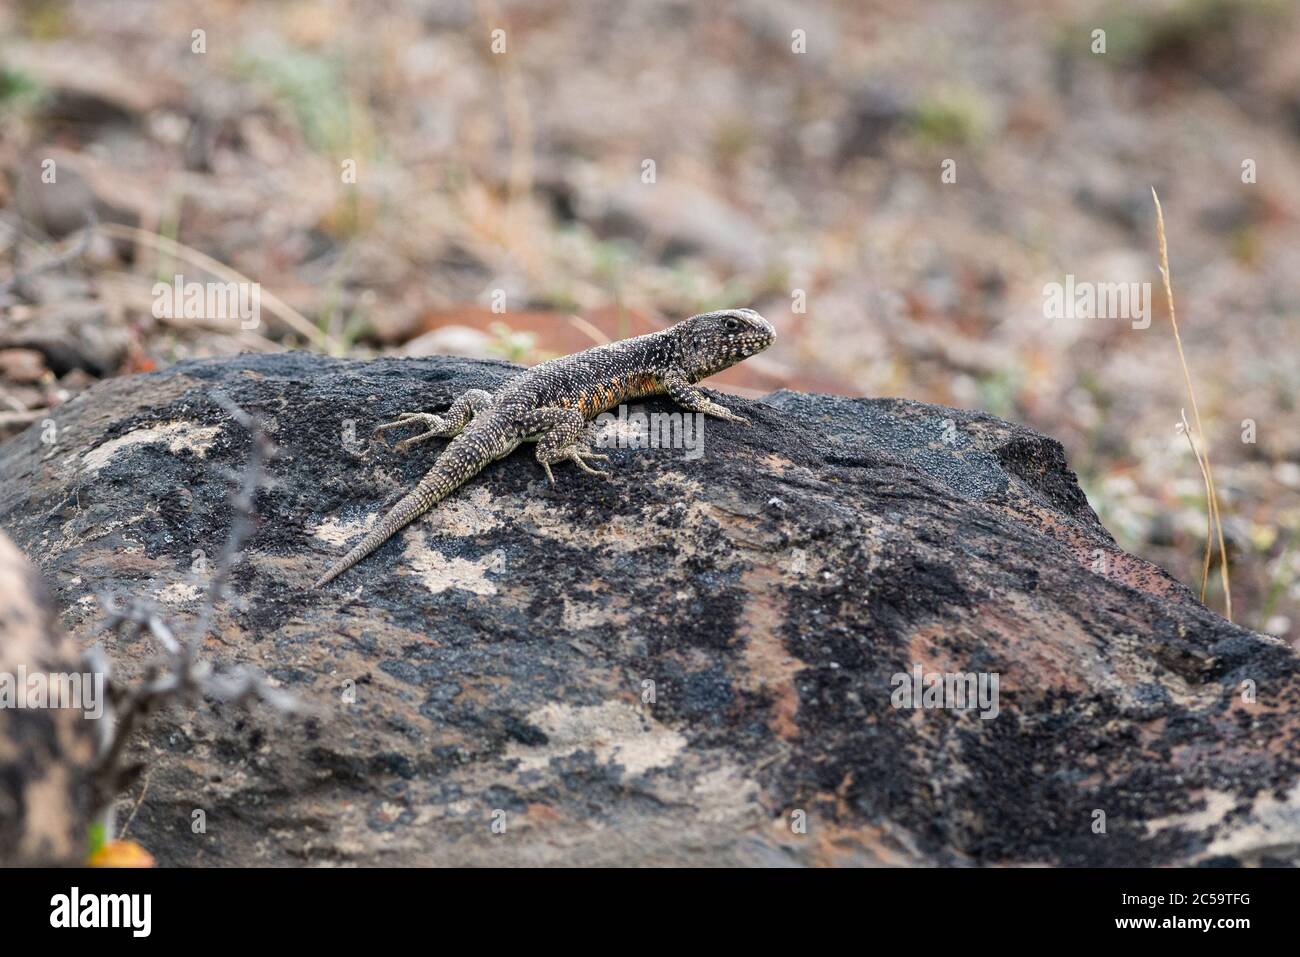 A Liolaemus sarmientoi lizard, the world's southernmost reptile. Photographed in Torres del Painel National Park, Chile Stock Photo